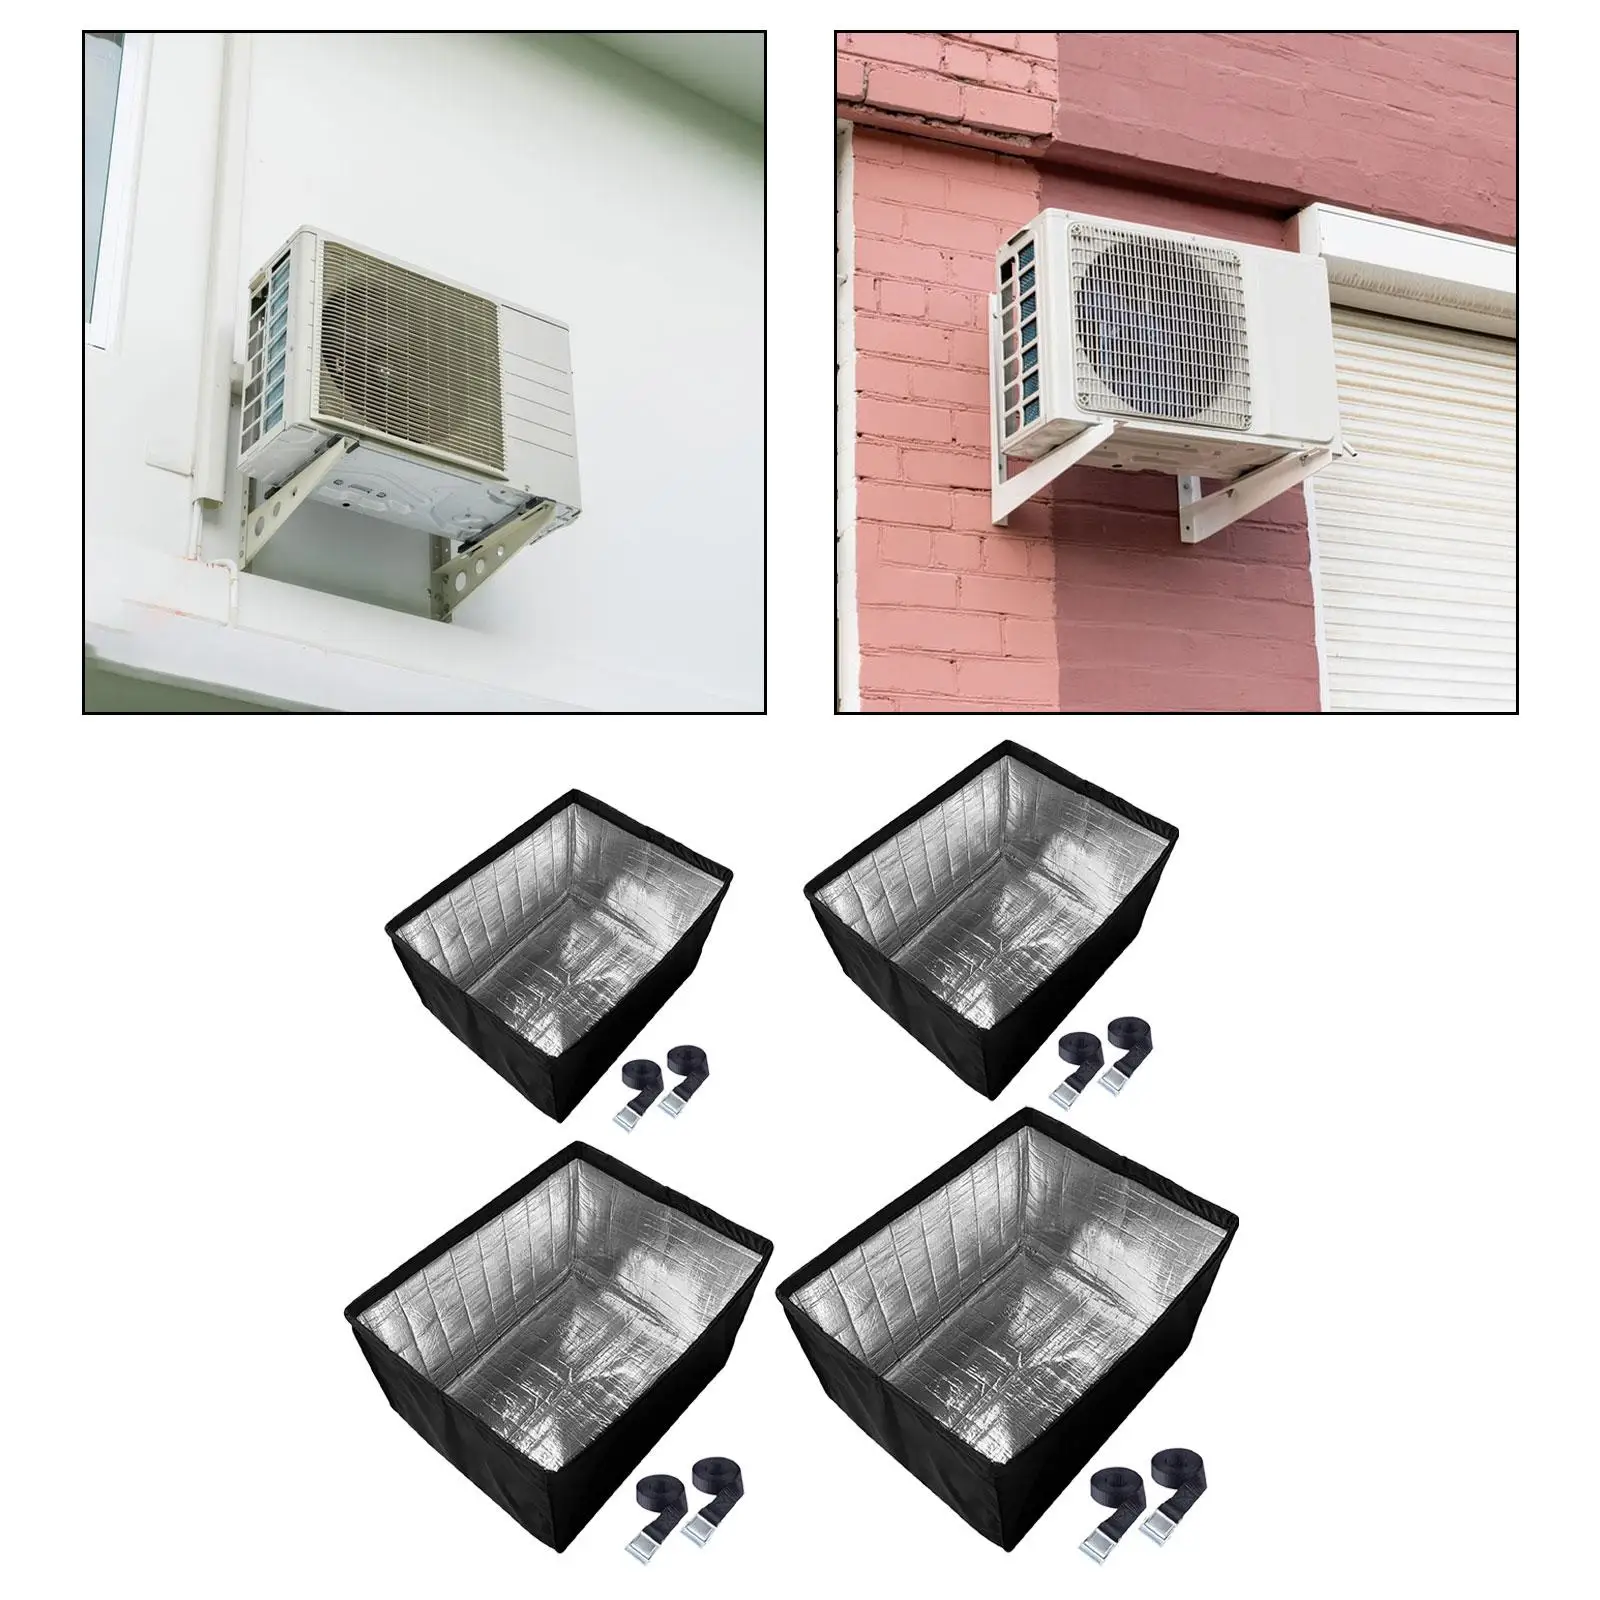 Air Conditioner Cover for Outside Units Keep Warm for School,Home Window